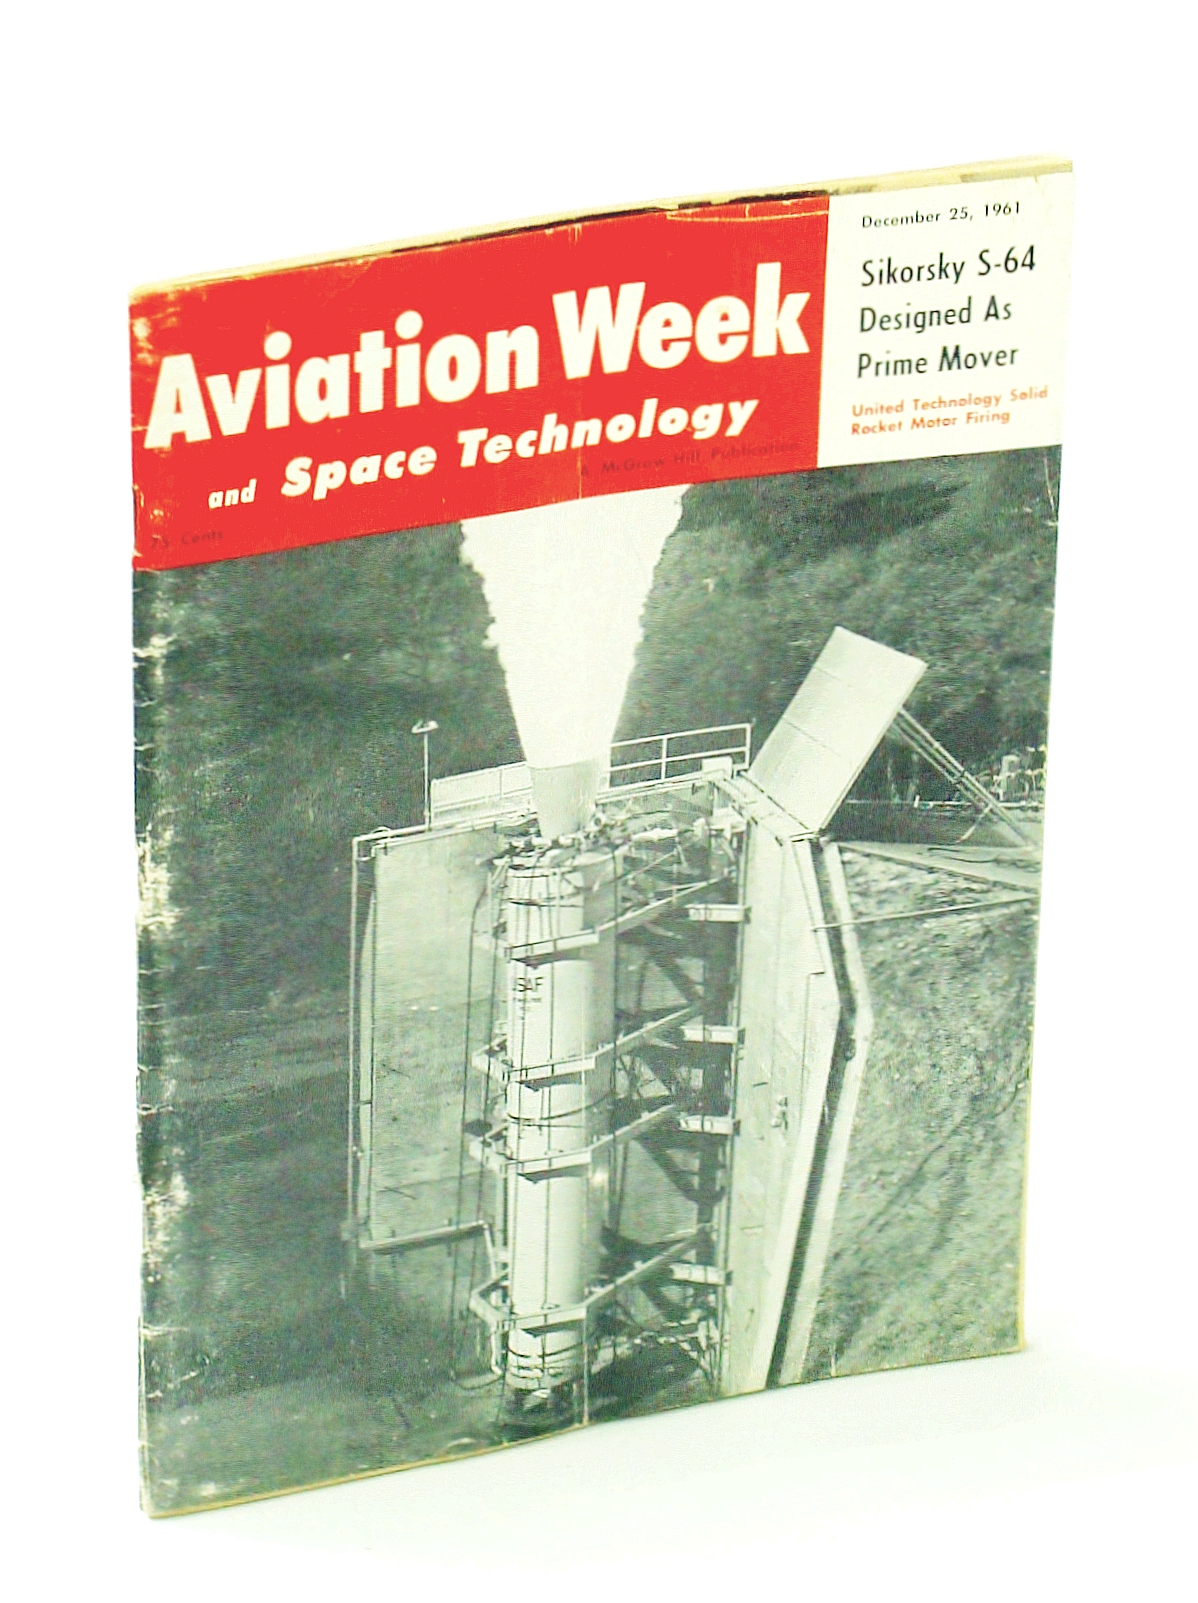 BOODA, LARRY; ET AL - Aviation Week and Space Technology Magazine, 25 December 1961, Vol. 75, No. 26 - Sikorsky S-64 Feature Article